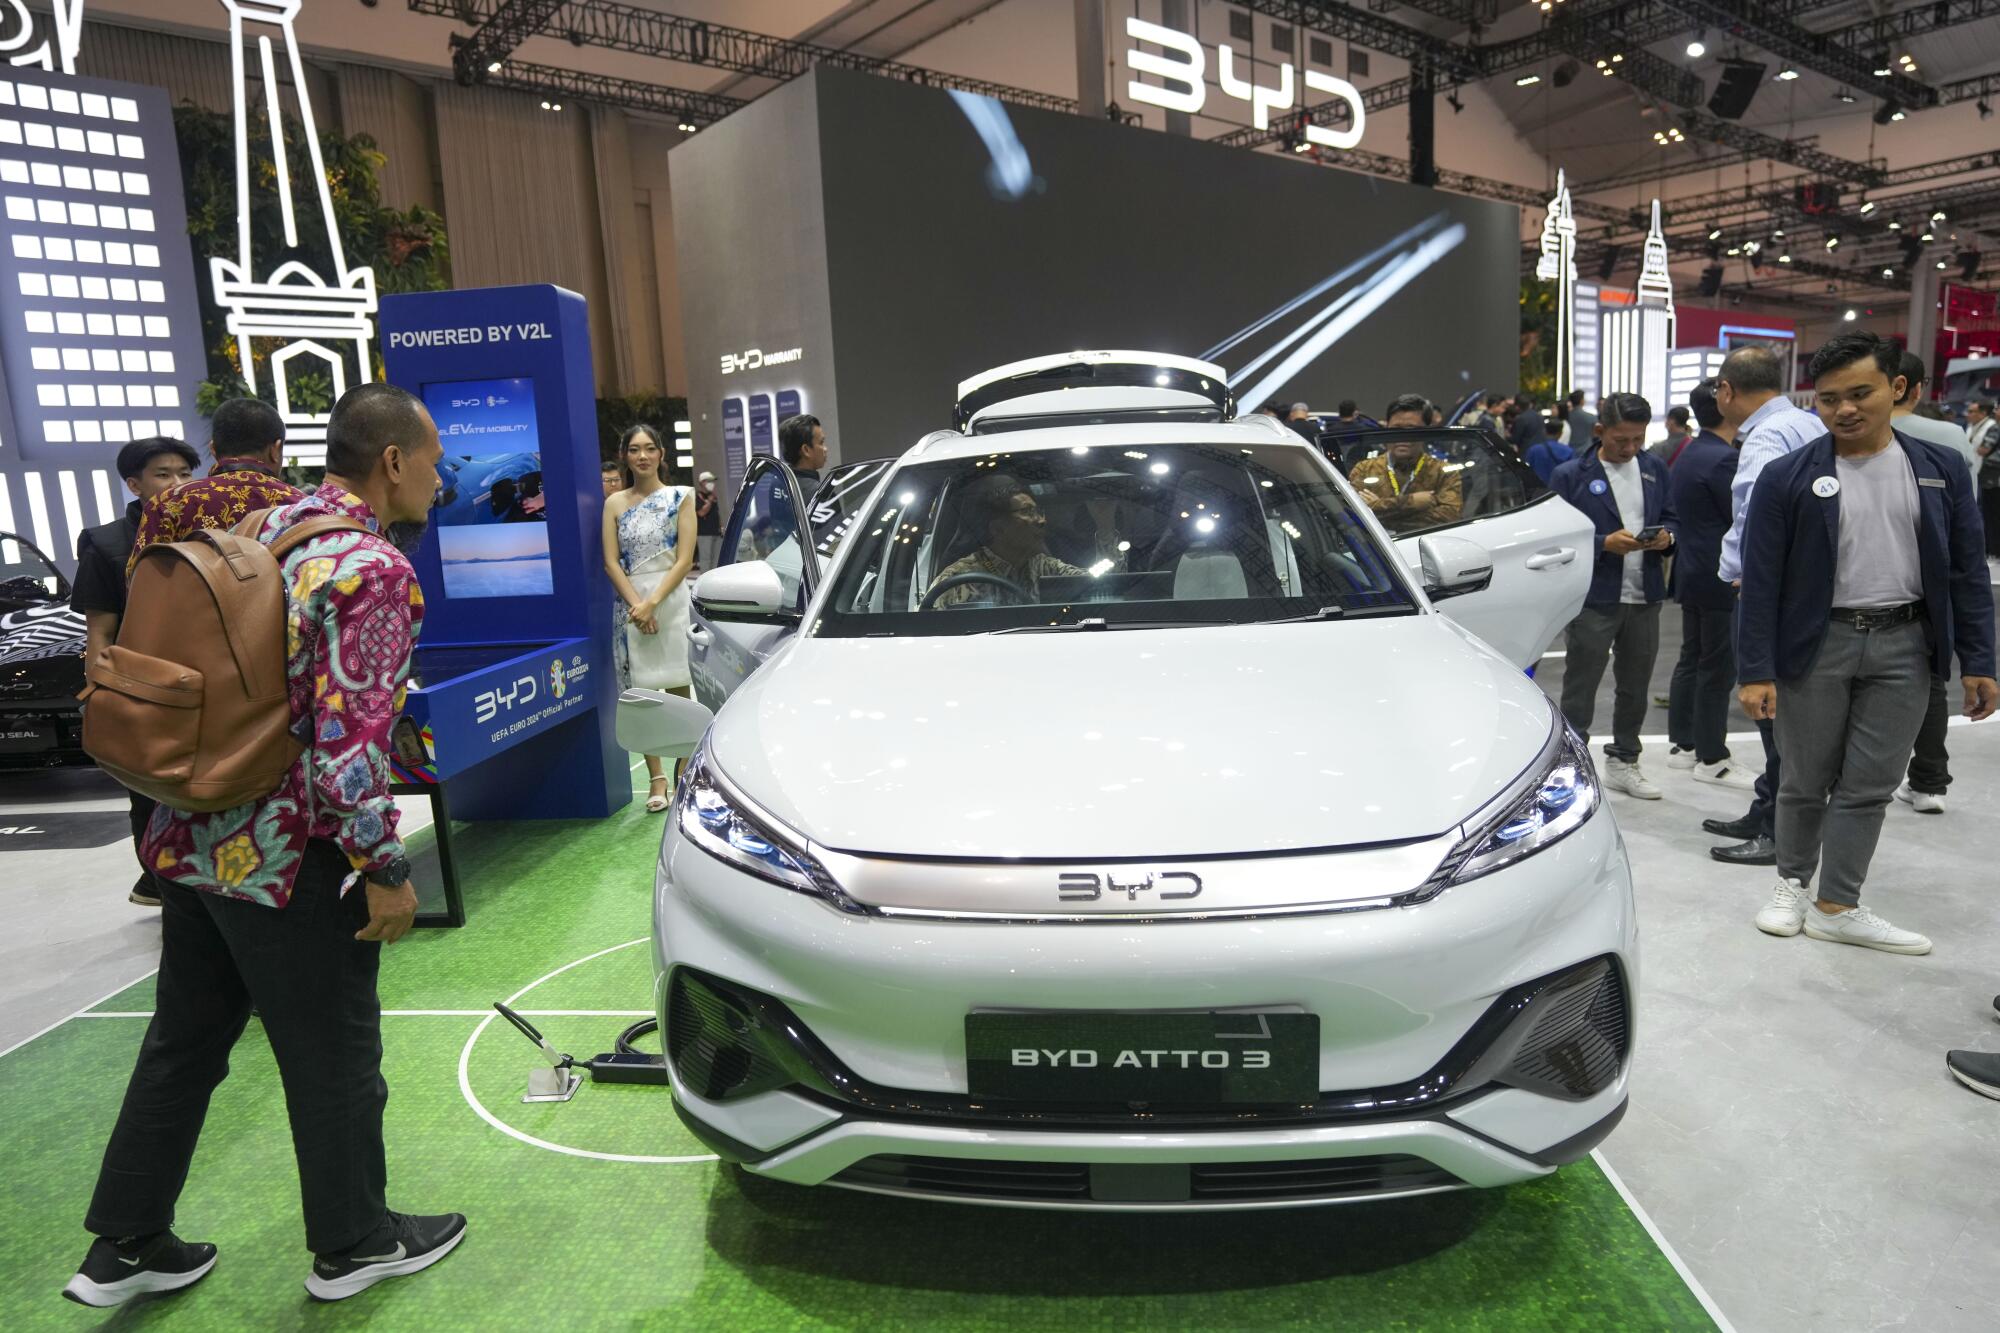 Visitors examine the inside and outside of a BYD ATTO 3 car during an auto show